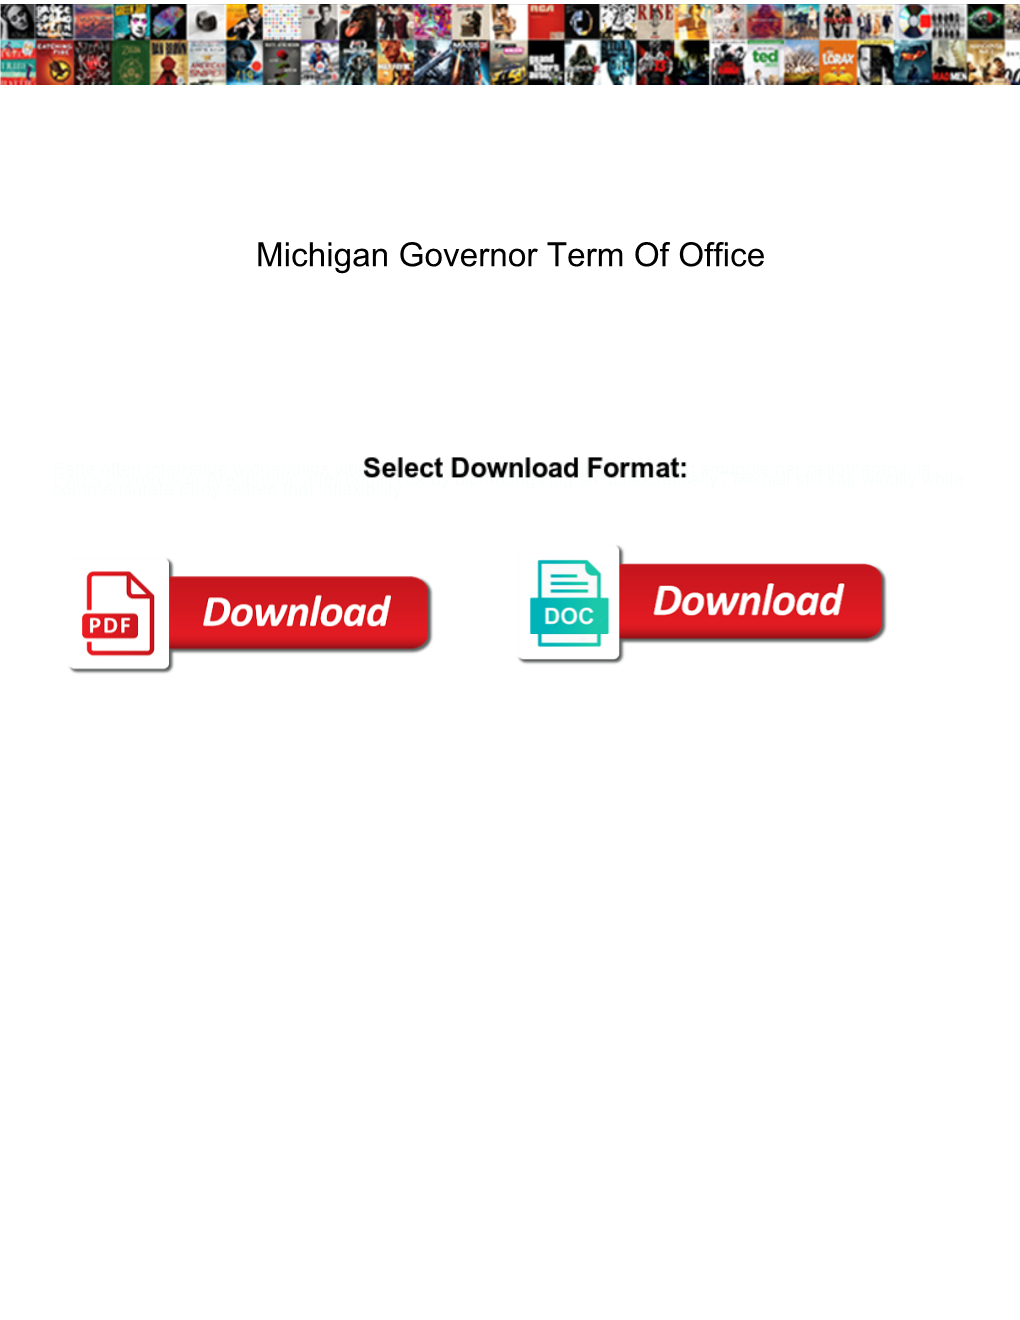 Michigan Governor Term of Office